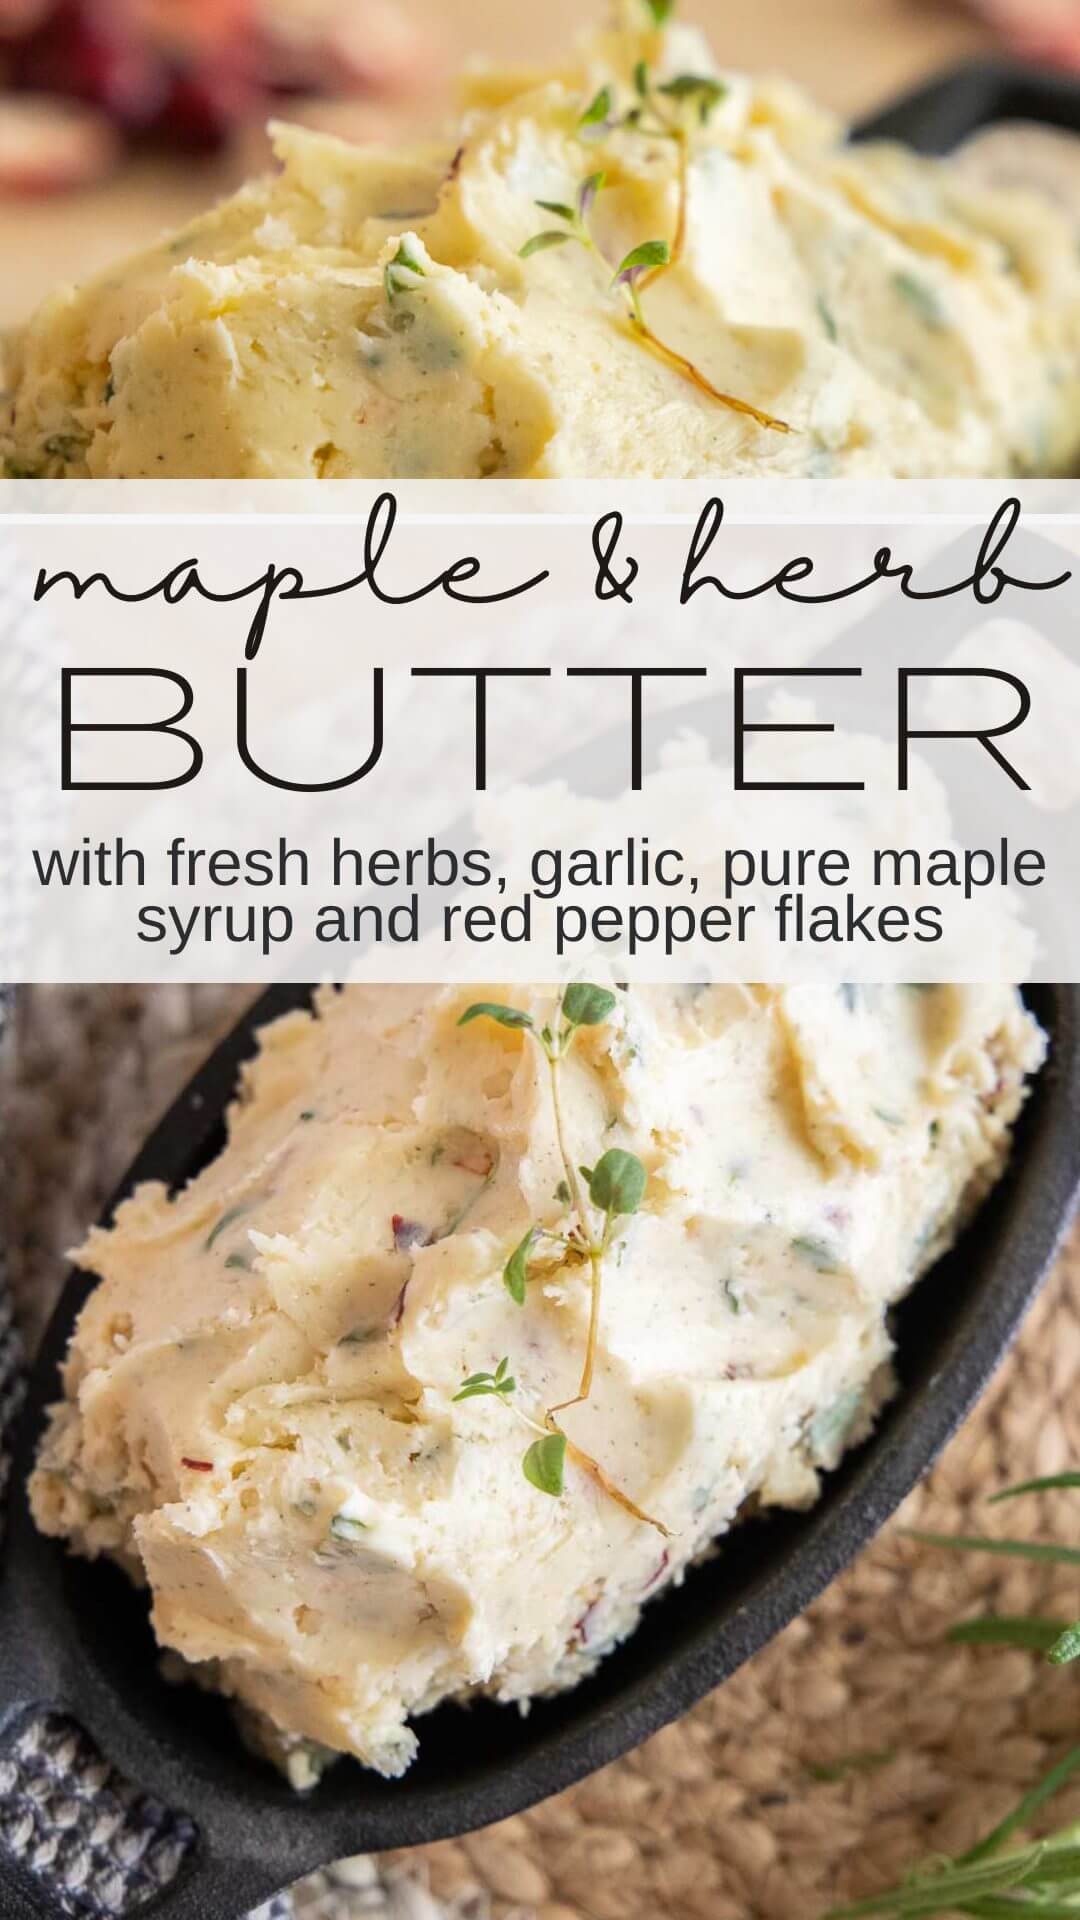 How to make an amazing herb butter with pure maple syrup, fresh herbs, garlic, parmesan cheese, and seas salt. Great for breads and more.